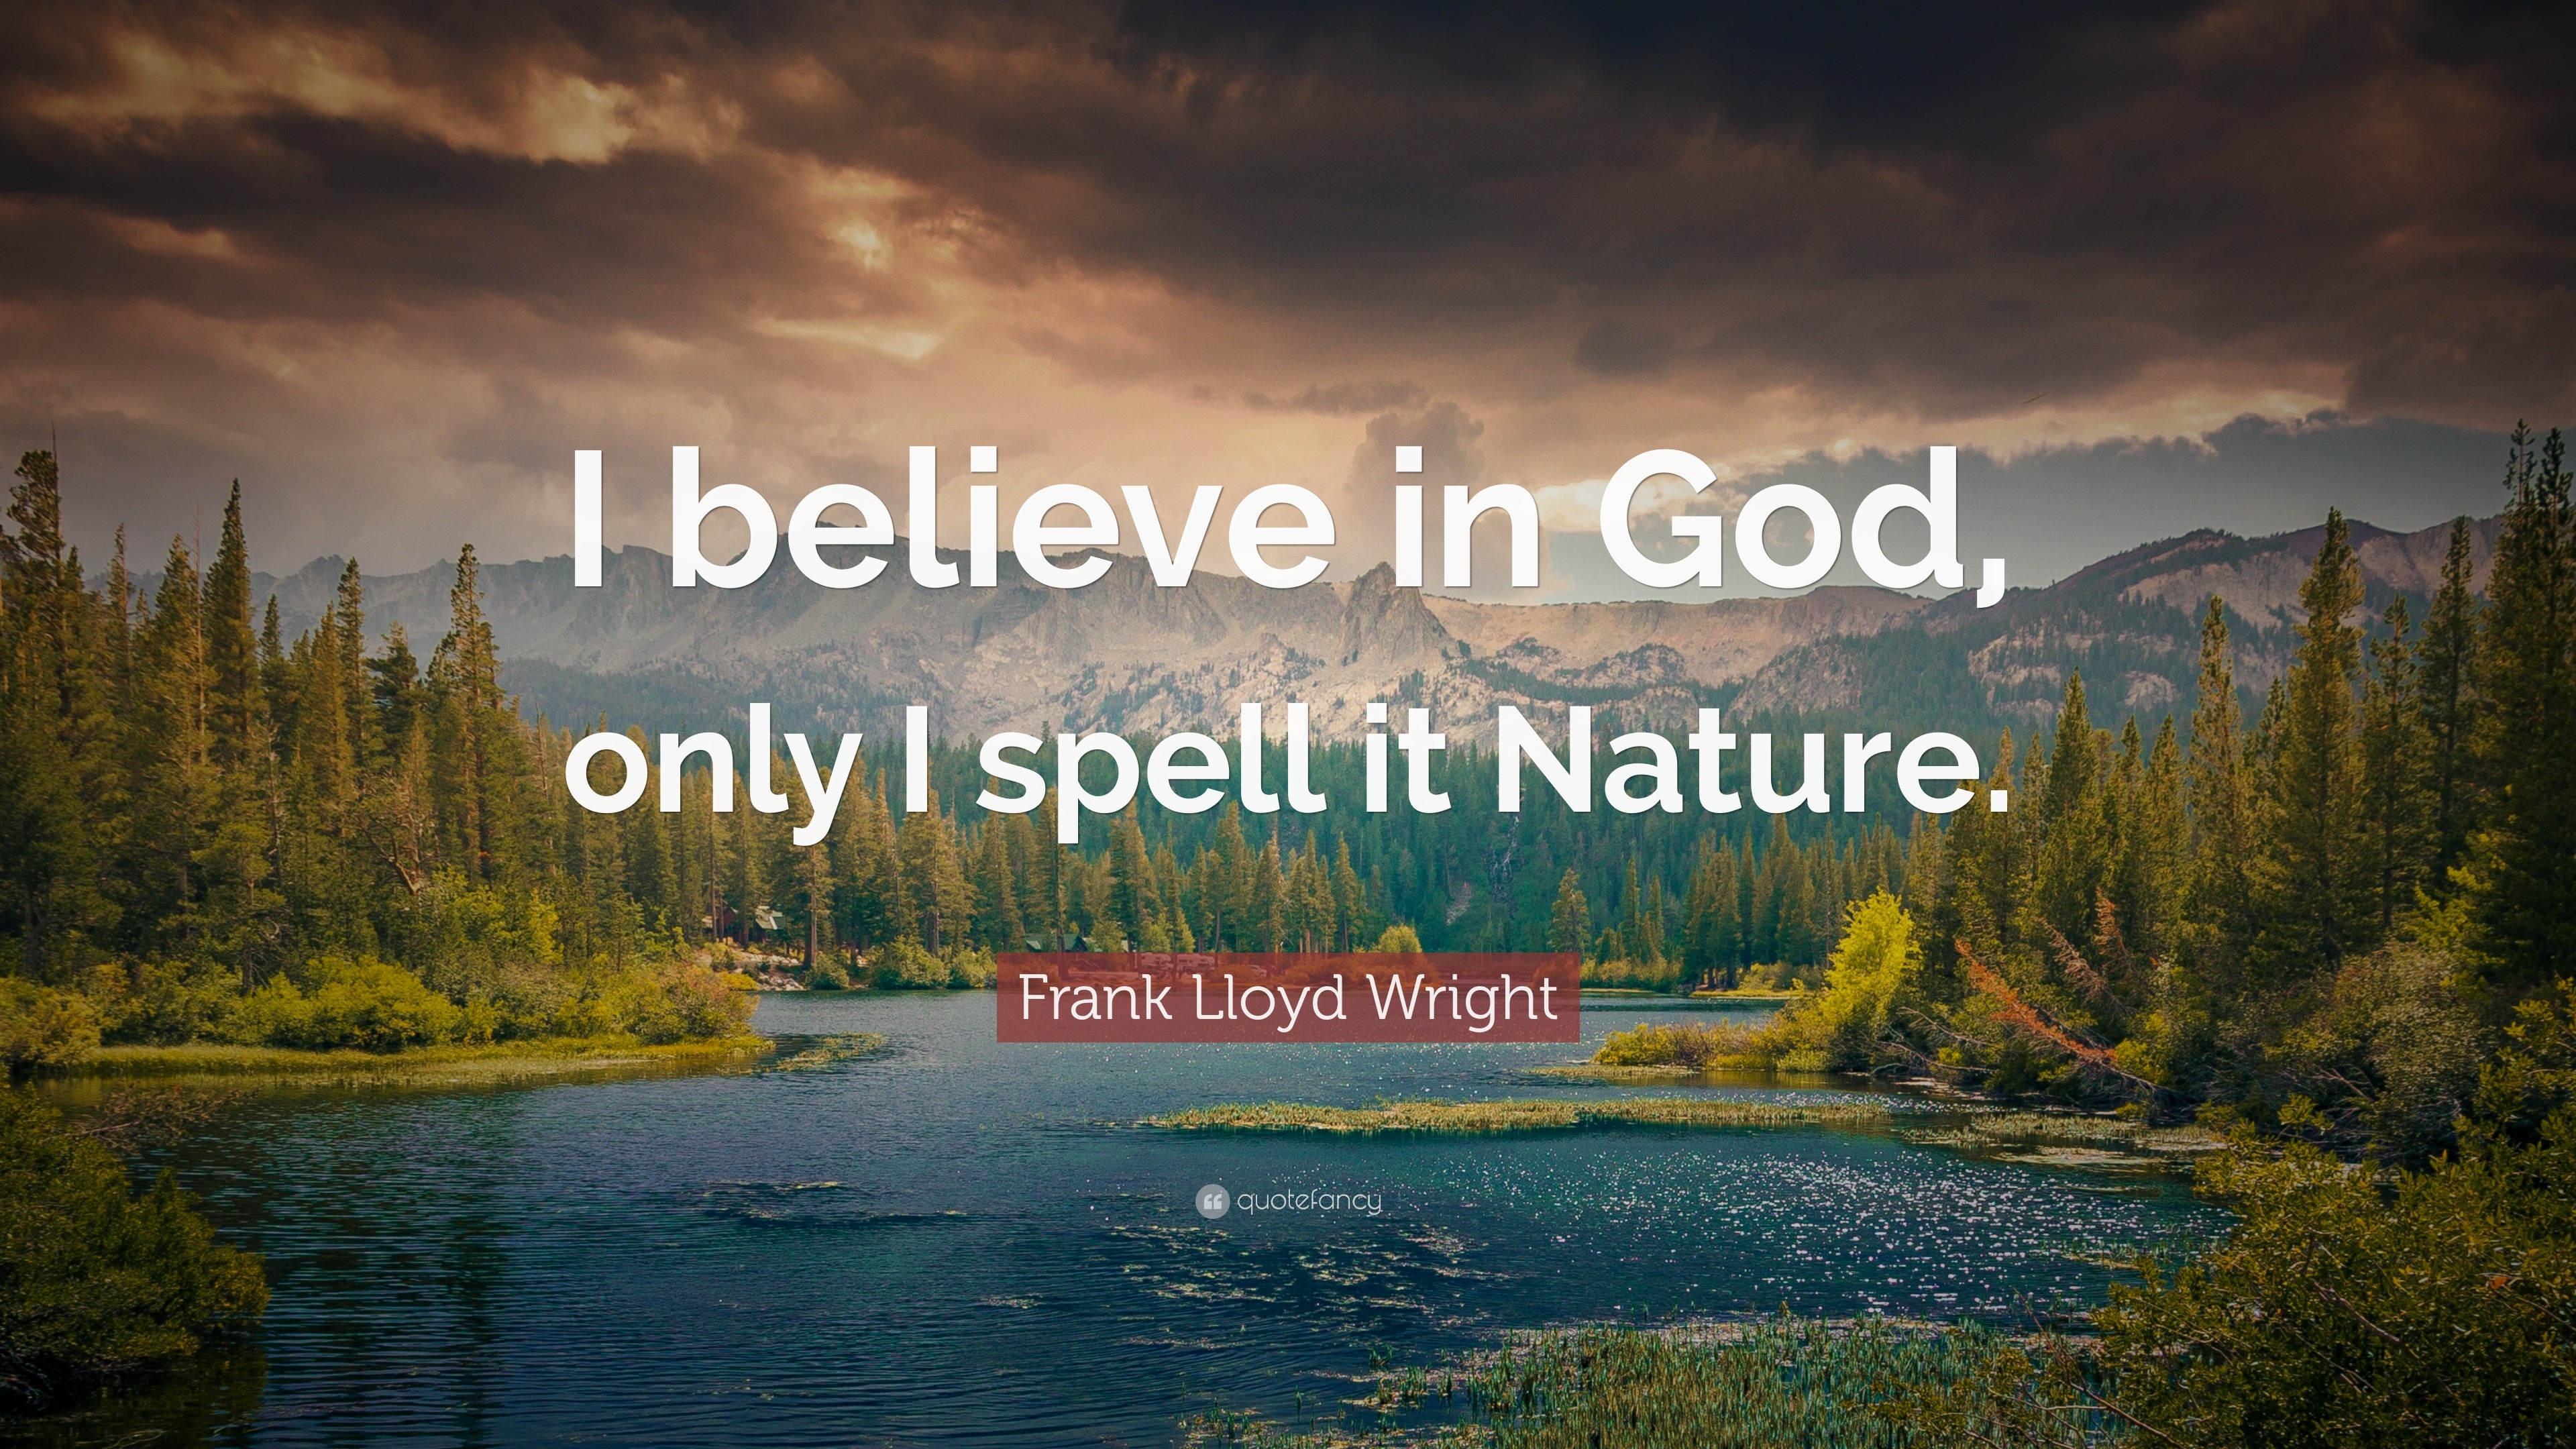 48636-Frank-Lloyd-Wright-Quote-I-believe-in-God-only-I-spell-it-Nature.jpg